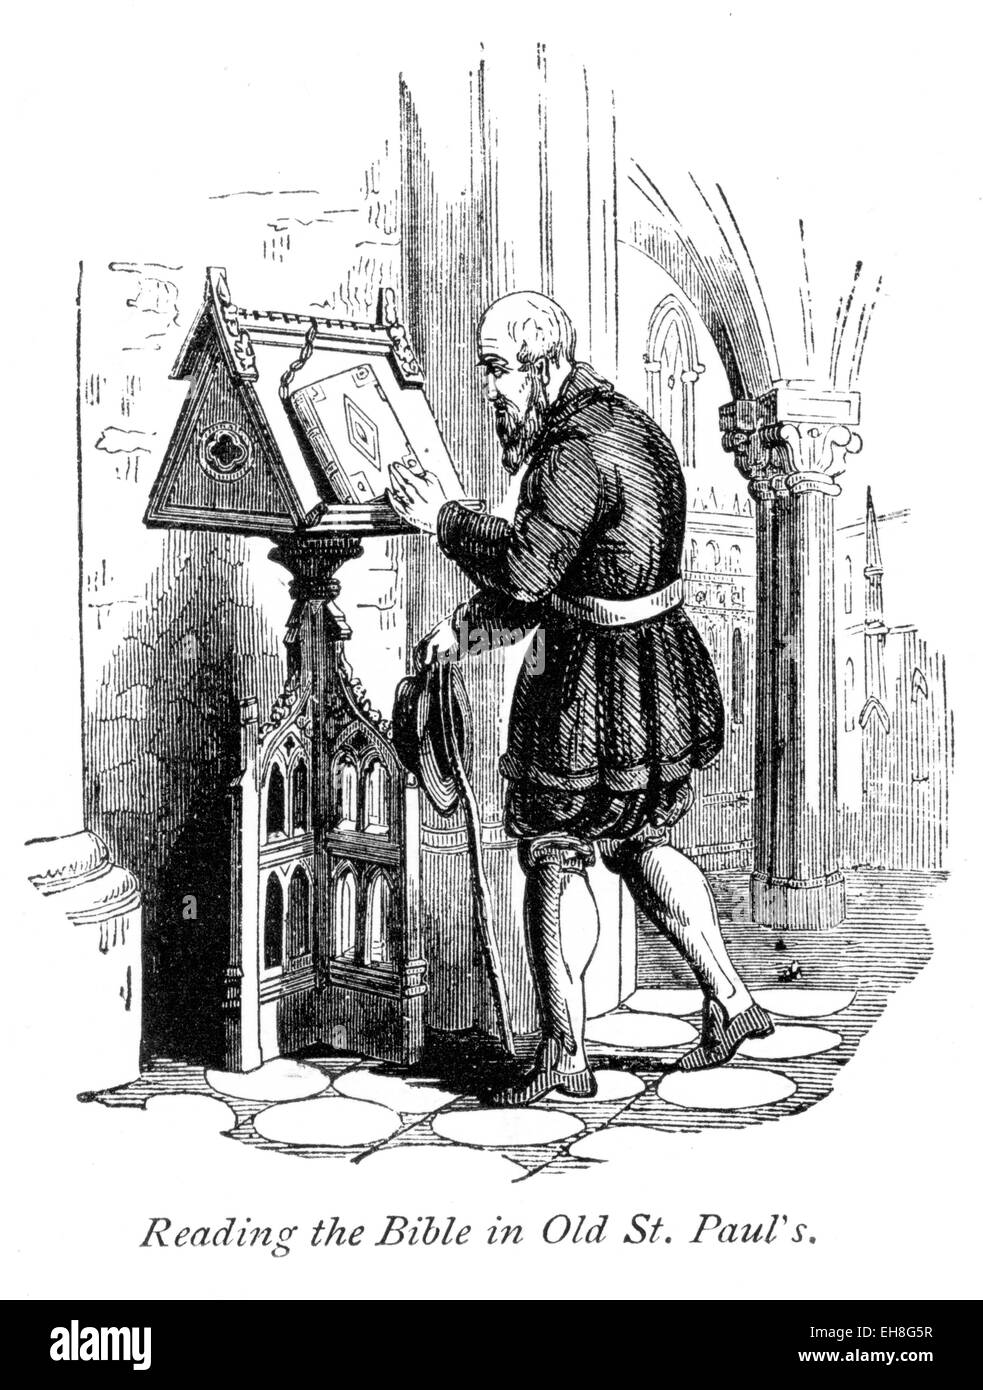 An engraving of a man Reading the Bible in Old St. Paul's Cathedral scanned at high resolution from a book printed in 1867. Believed copyright free. Stock Photo